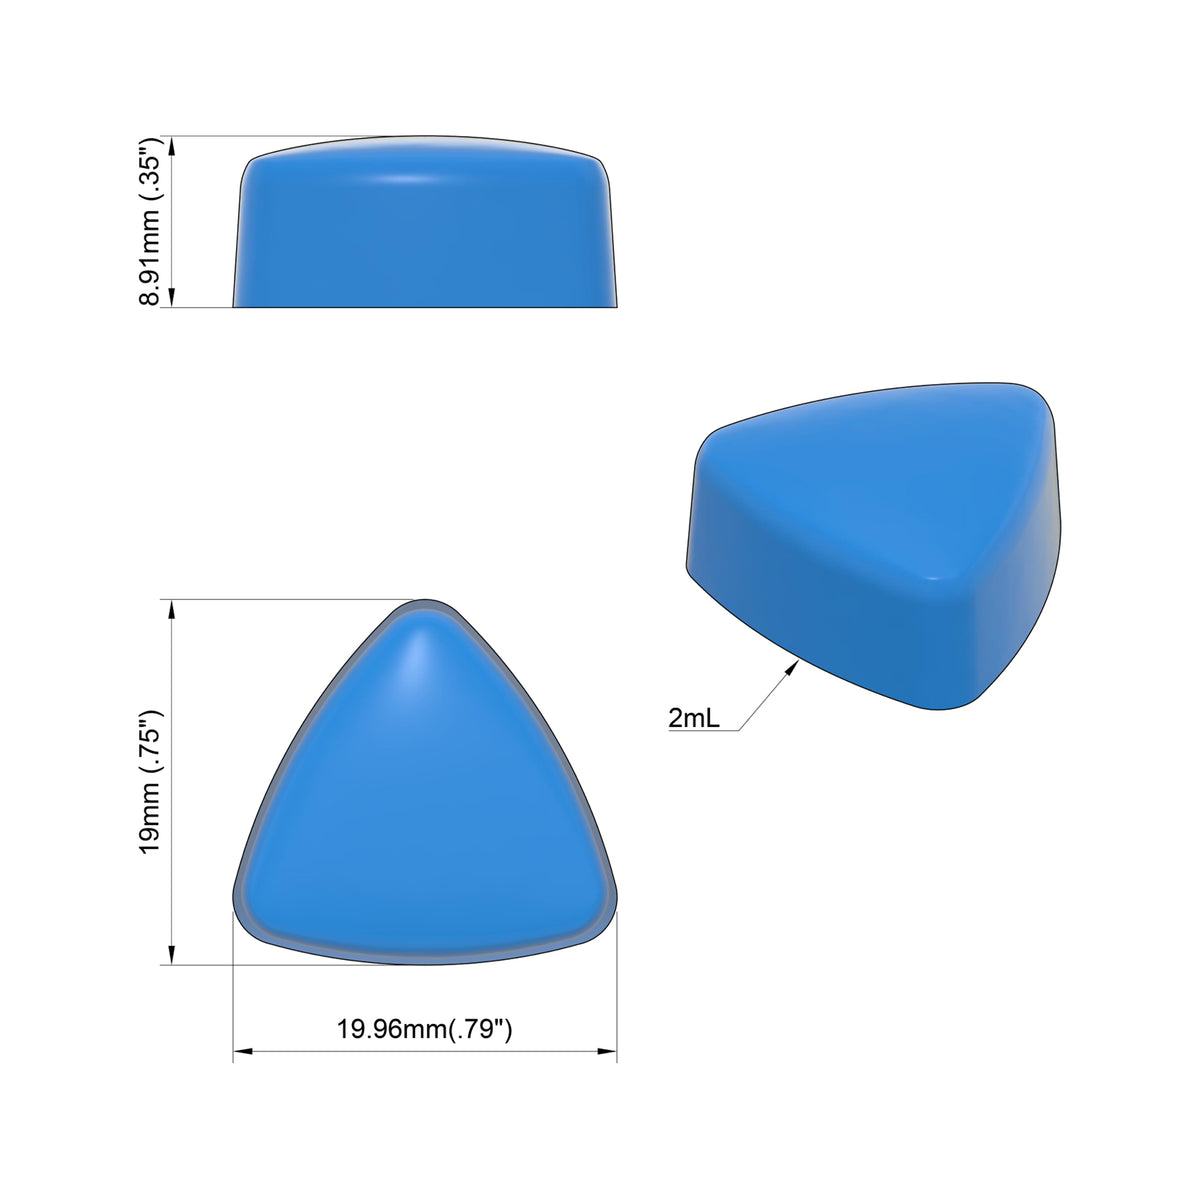 2mL Rounded Triangle Gummy Mold